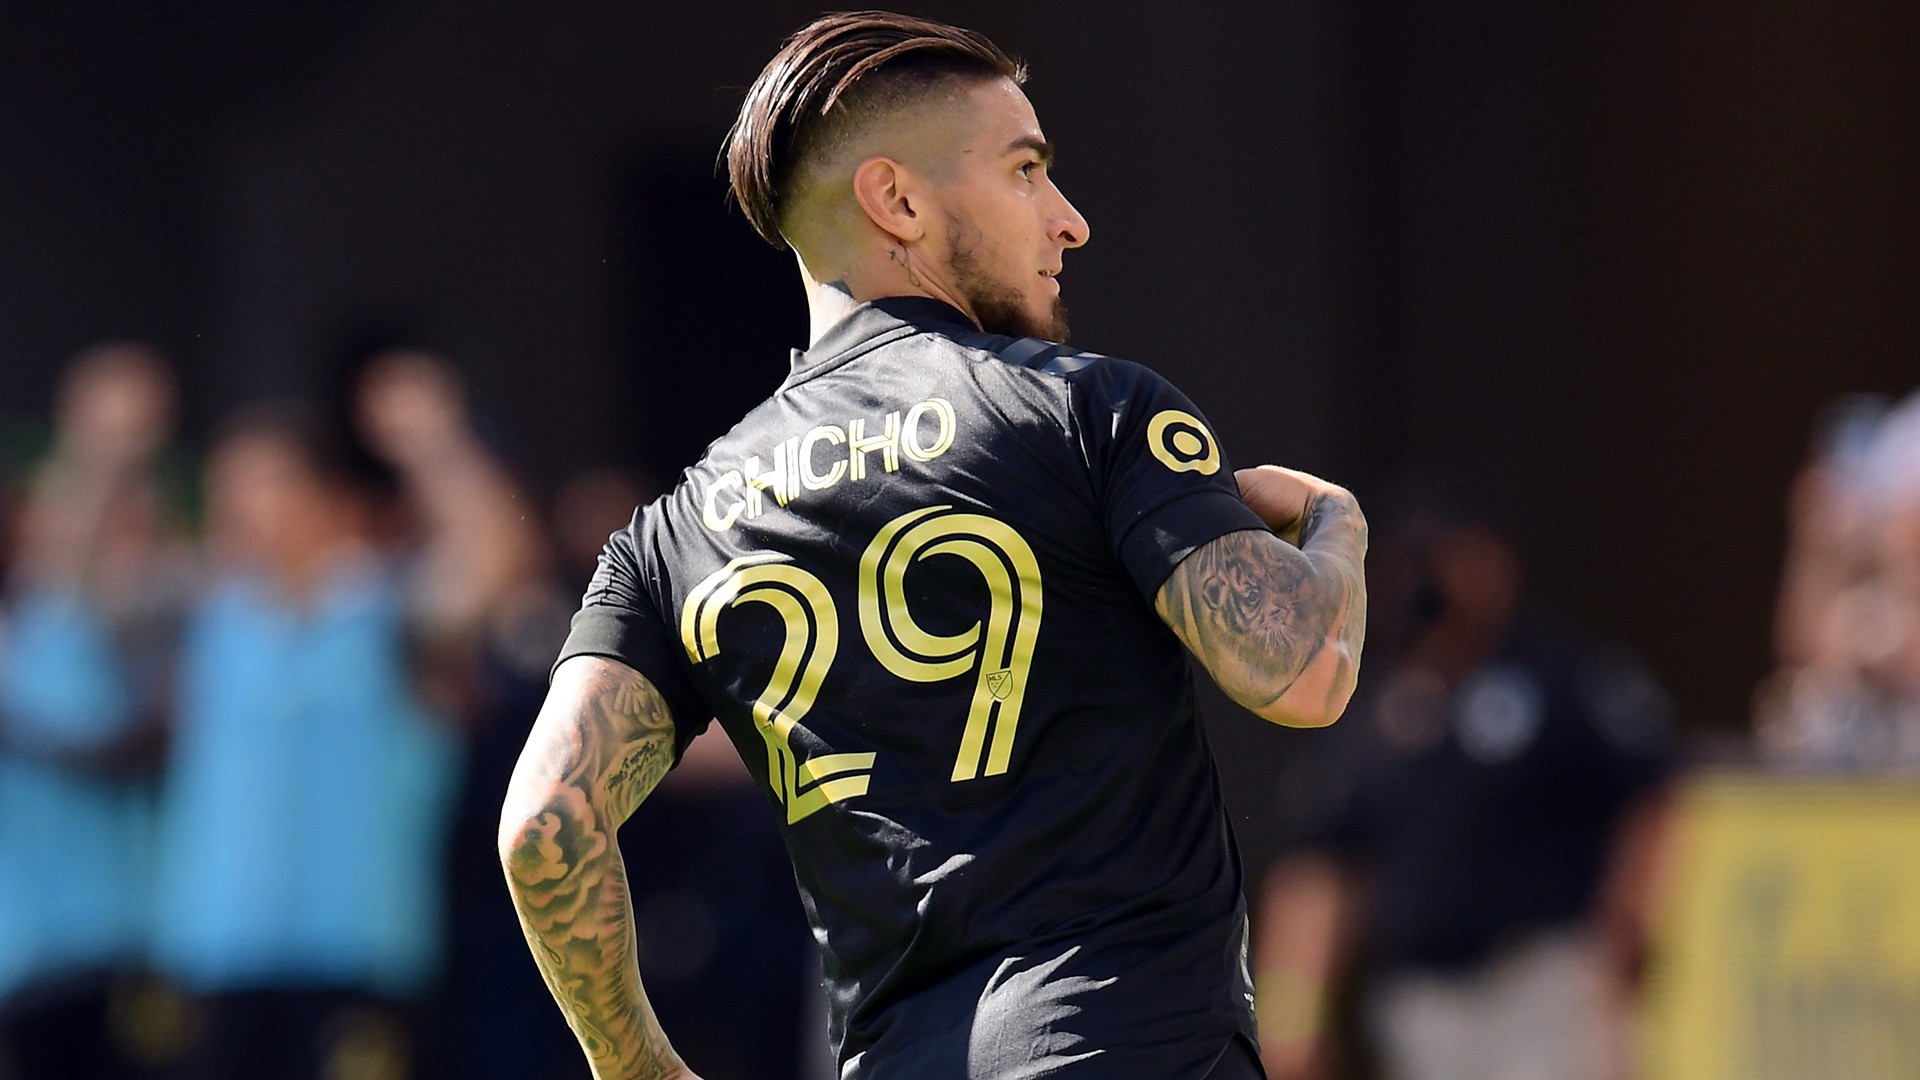 He's a leader:" LAFC hail Chicho Arango after brace keeps their playoff hopes alive | MLSSoccer.com